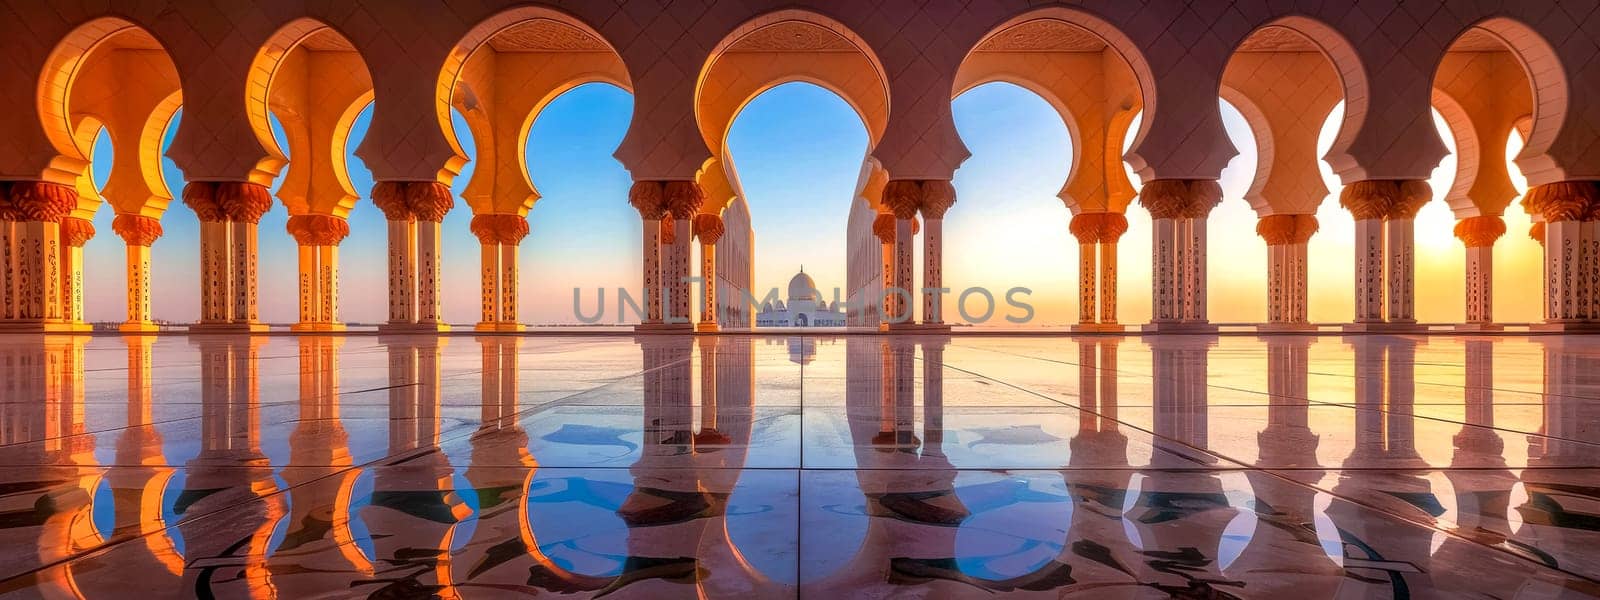 Panoramic view of a mosque at sunset with arches reflecting on glossy floor